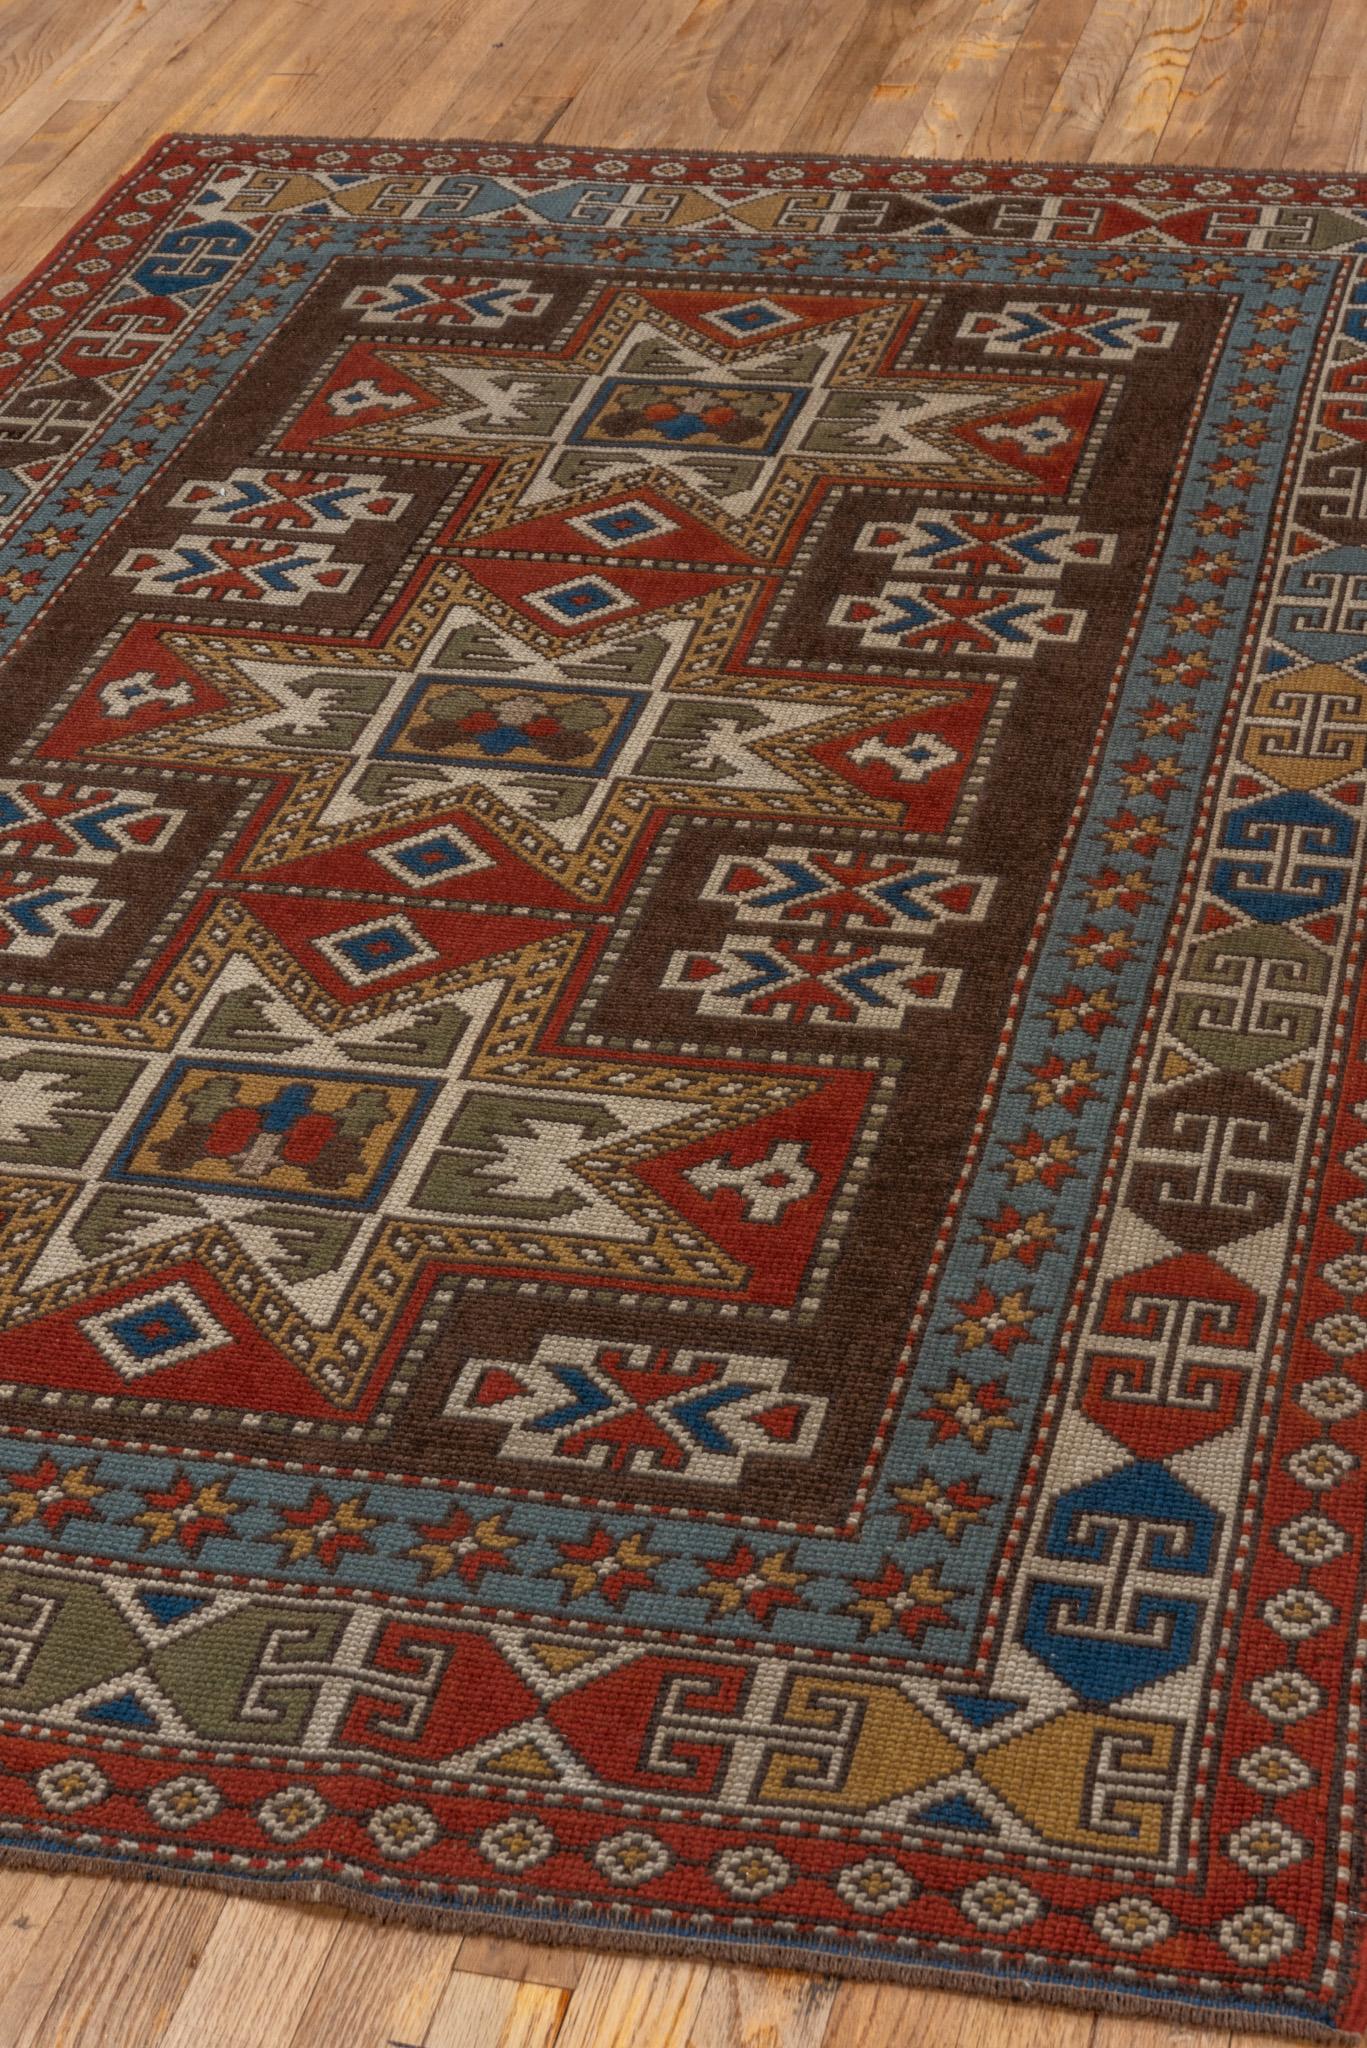 A Caucasian Rug circa 1940. Handknotted with 100% wool yarn.